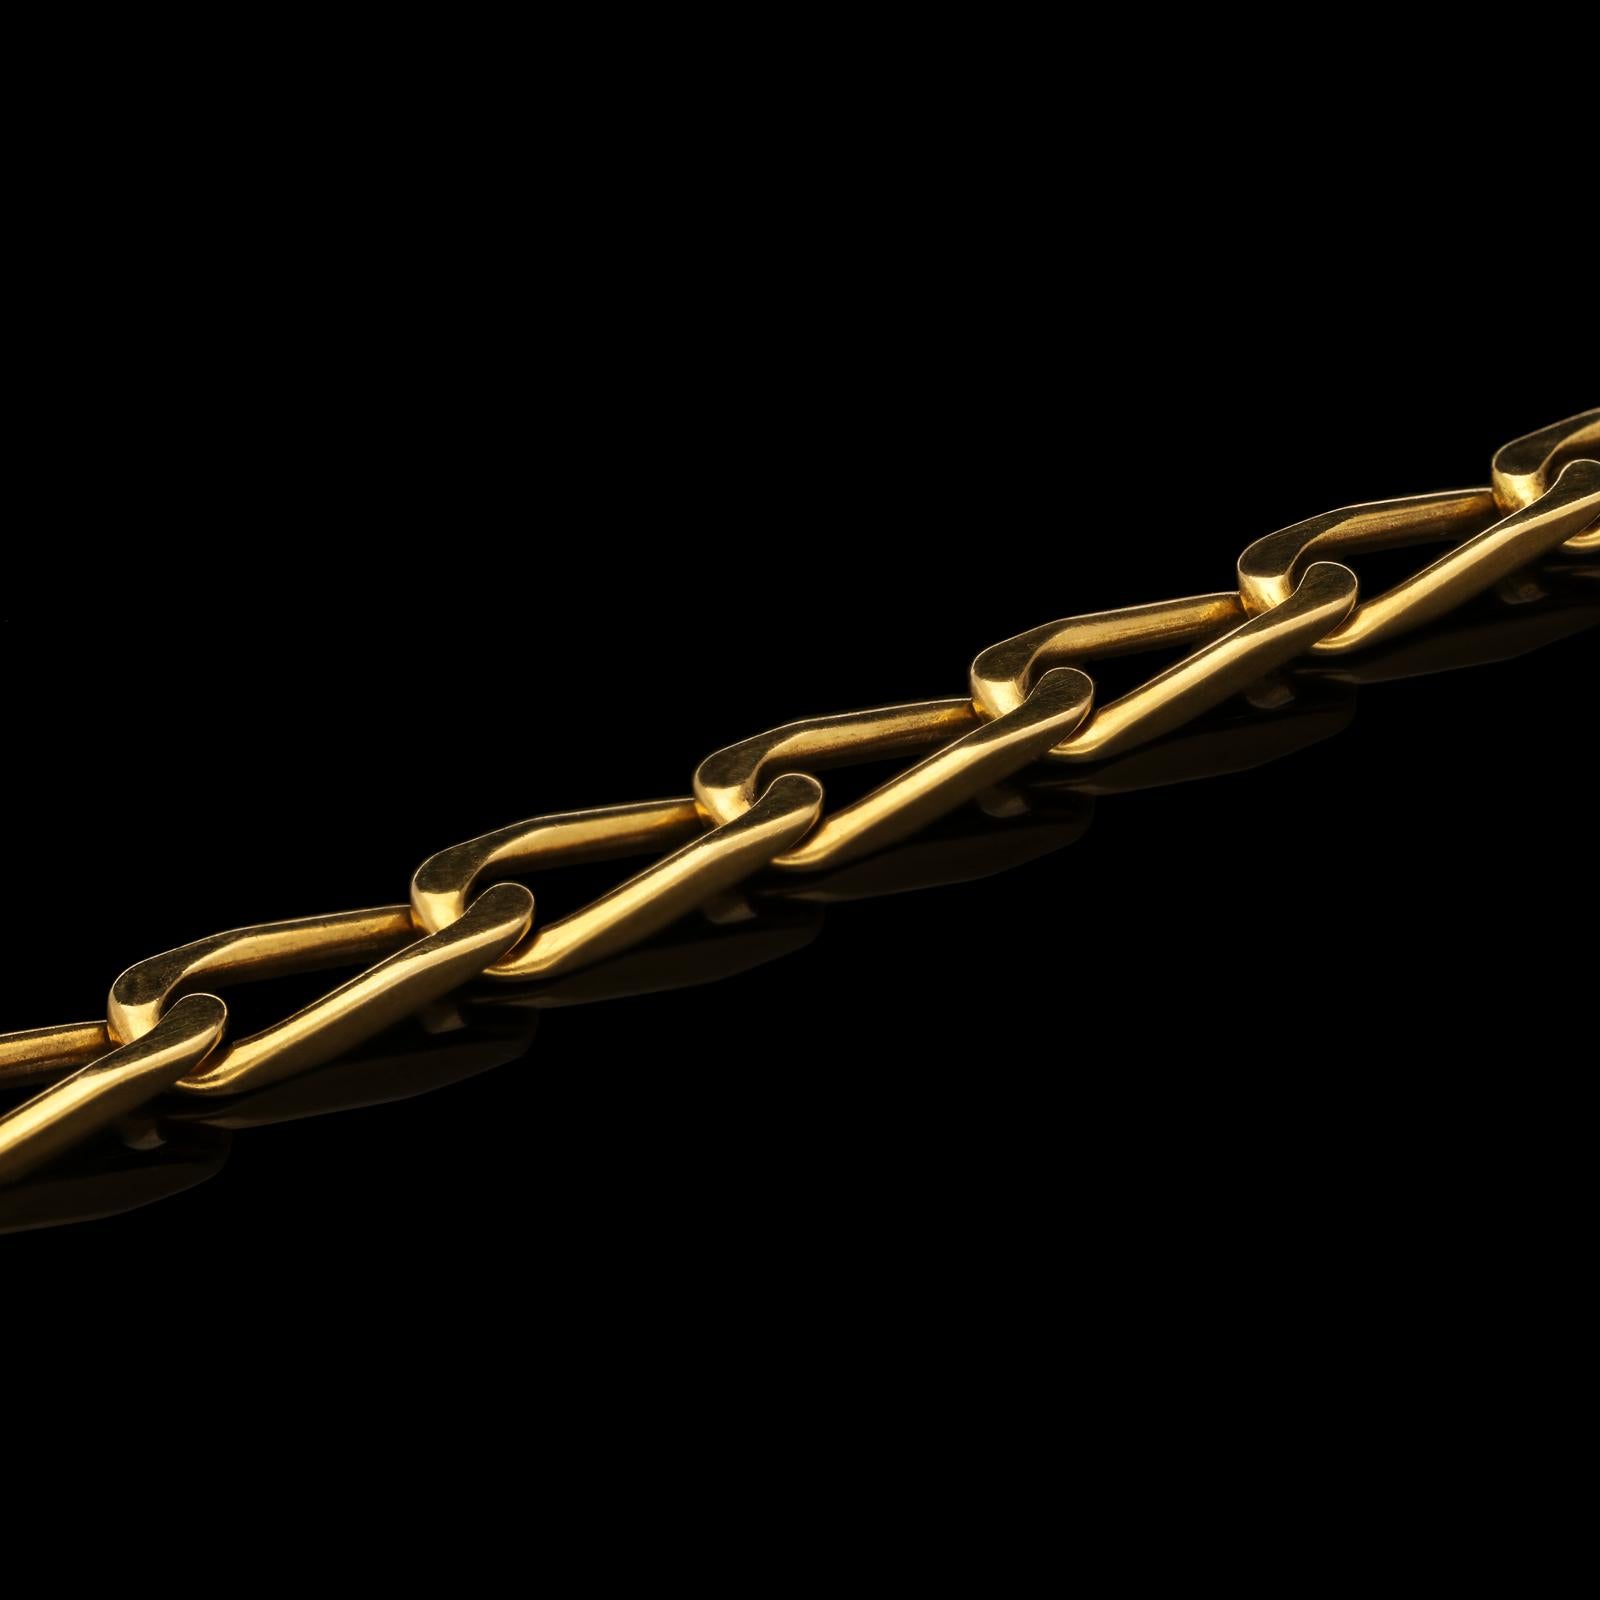 A classic gold paper clip chain necklace by Cartier 1976, the long chain measuring 39.5 inches long and formed of uniform oval links of paper clip inspired design which have a slight twist to them allowing the necklace to sit perfectly flat, to a